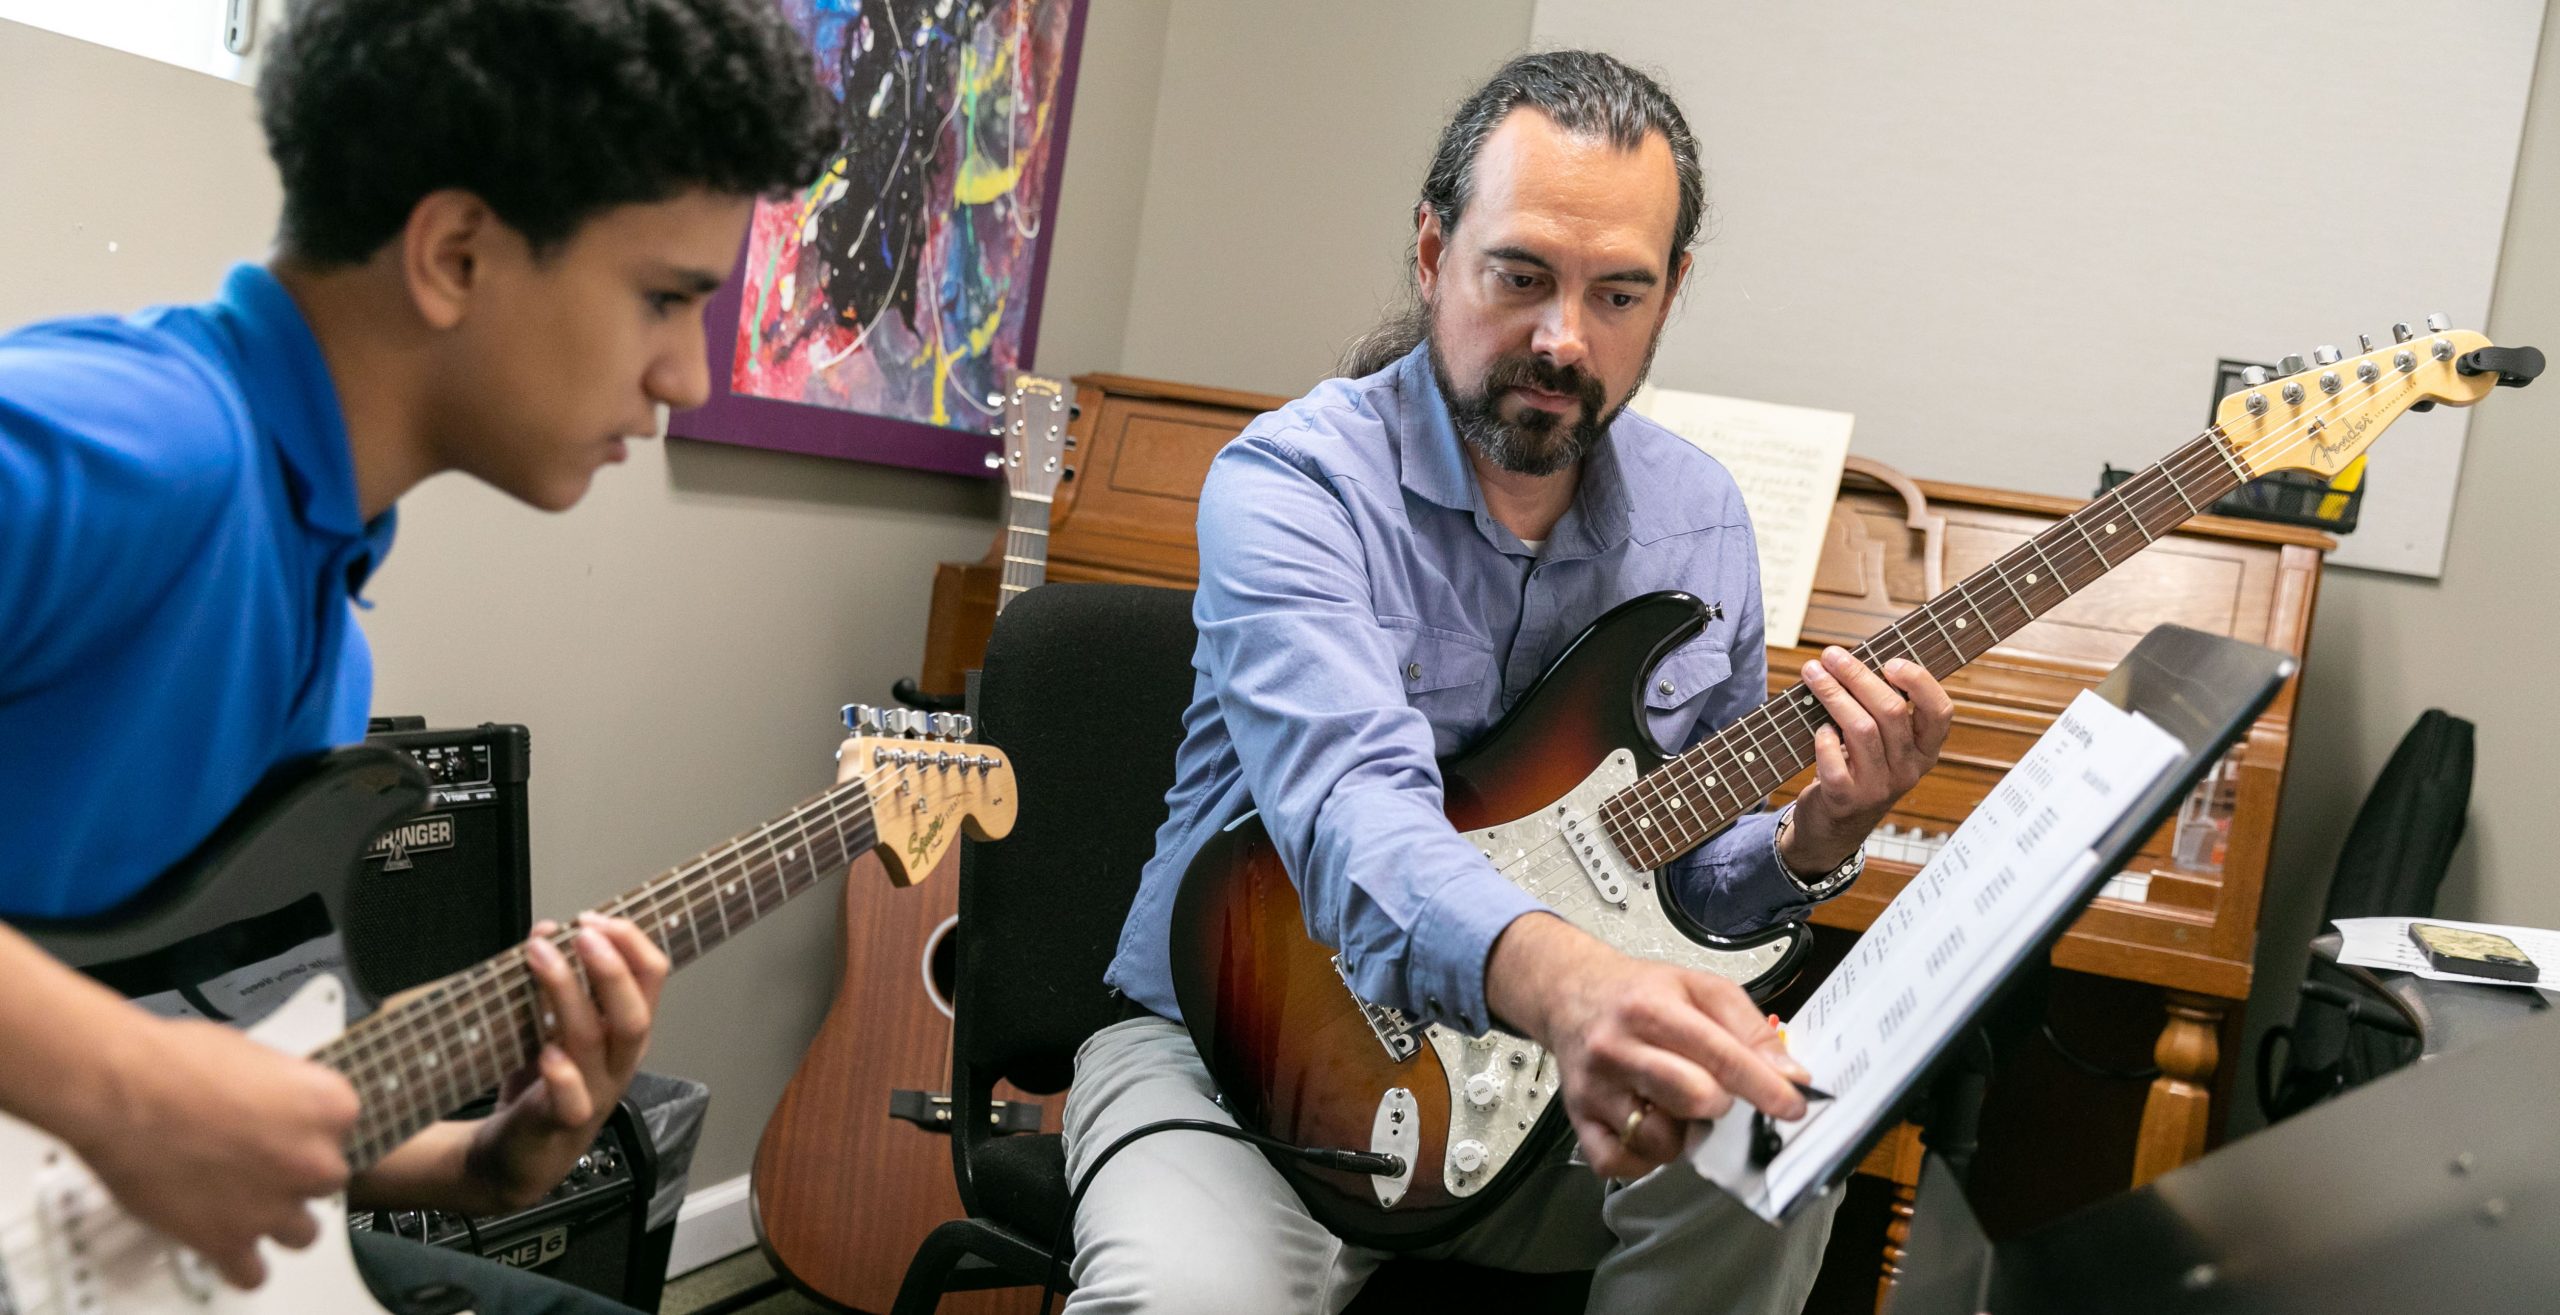 A private guitar lesson at Community Music School in the Martin Guitar Studio. On the right, teacher Joe Wagner with a blue button down shirt, dark hair pulled back in a ponytail, and holding a white, black, and brown electric guitar, points to music on a stand. Teenage student, Andrew, wearing a blue polo shirt, and holding a black and white electric guitar looks on intensely.